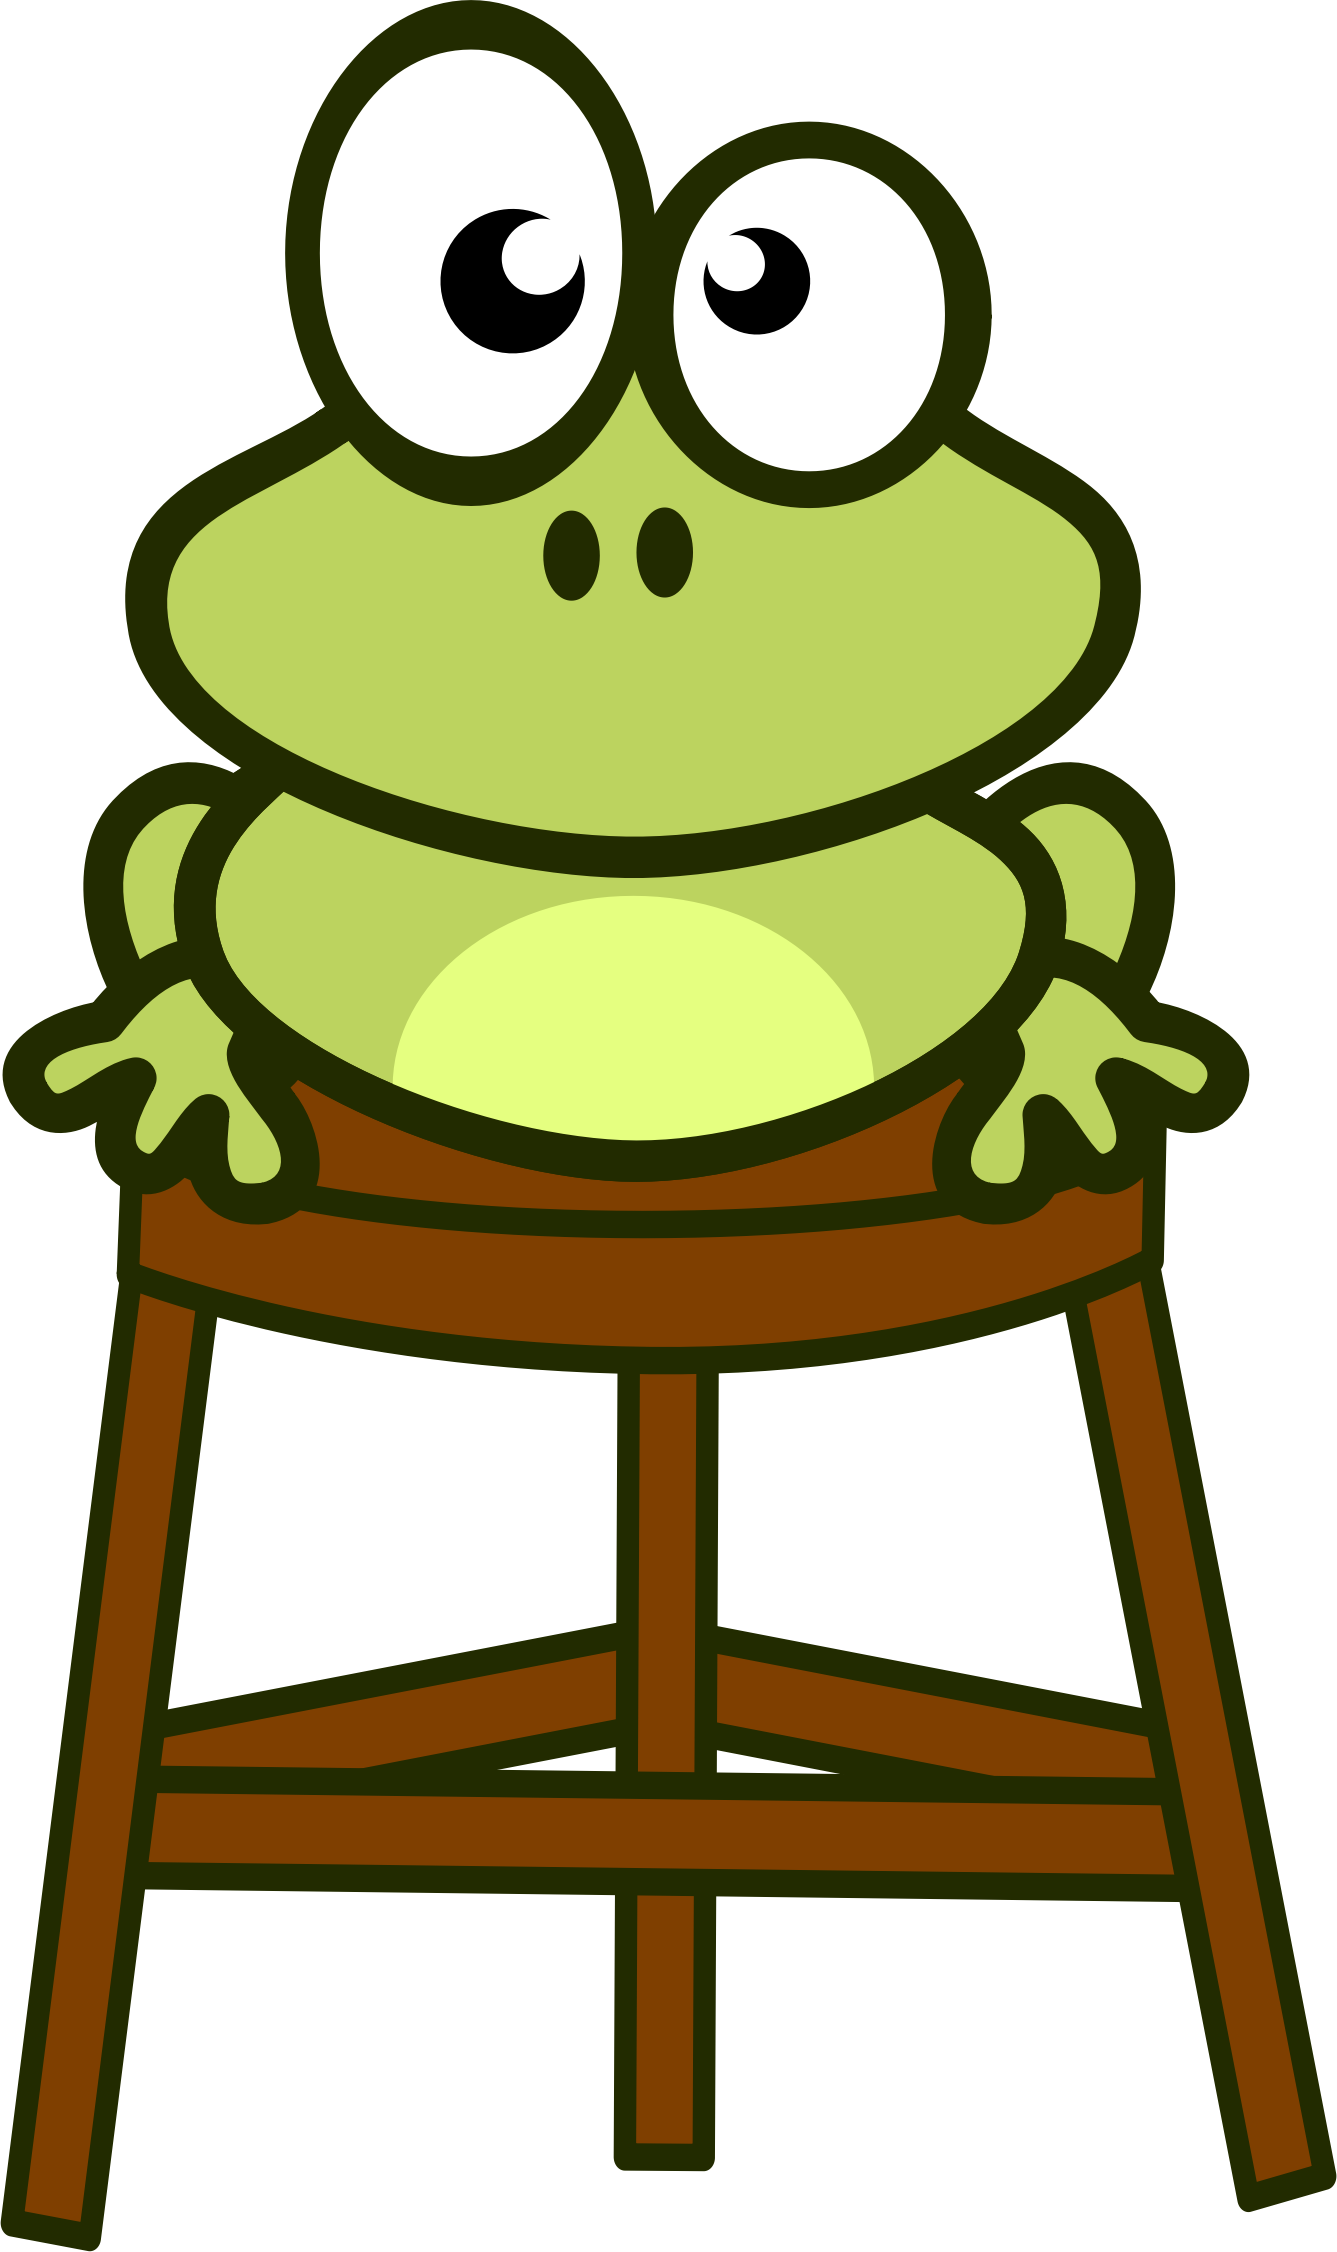 Clipart - frog on stool